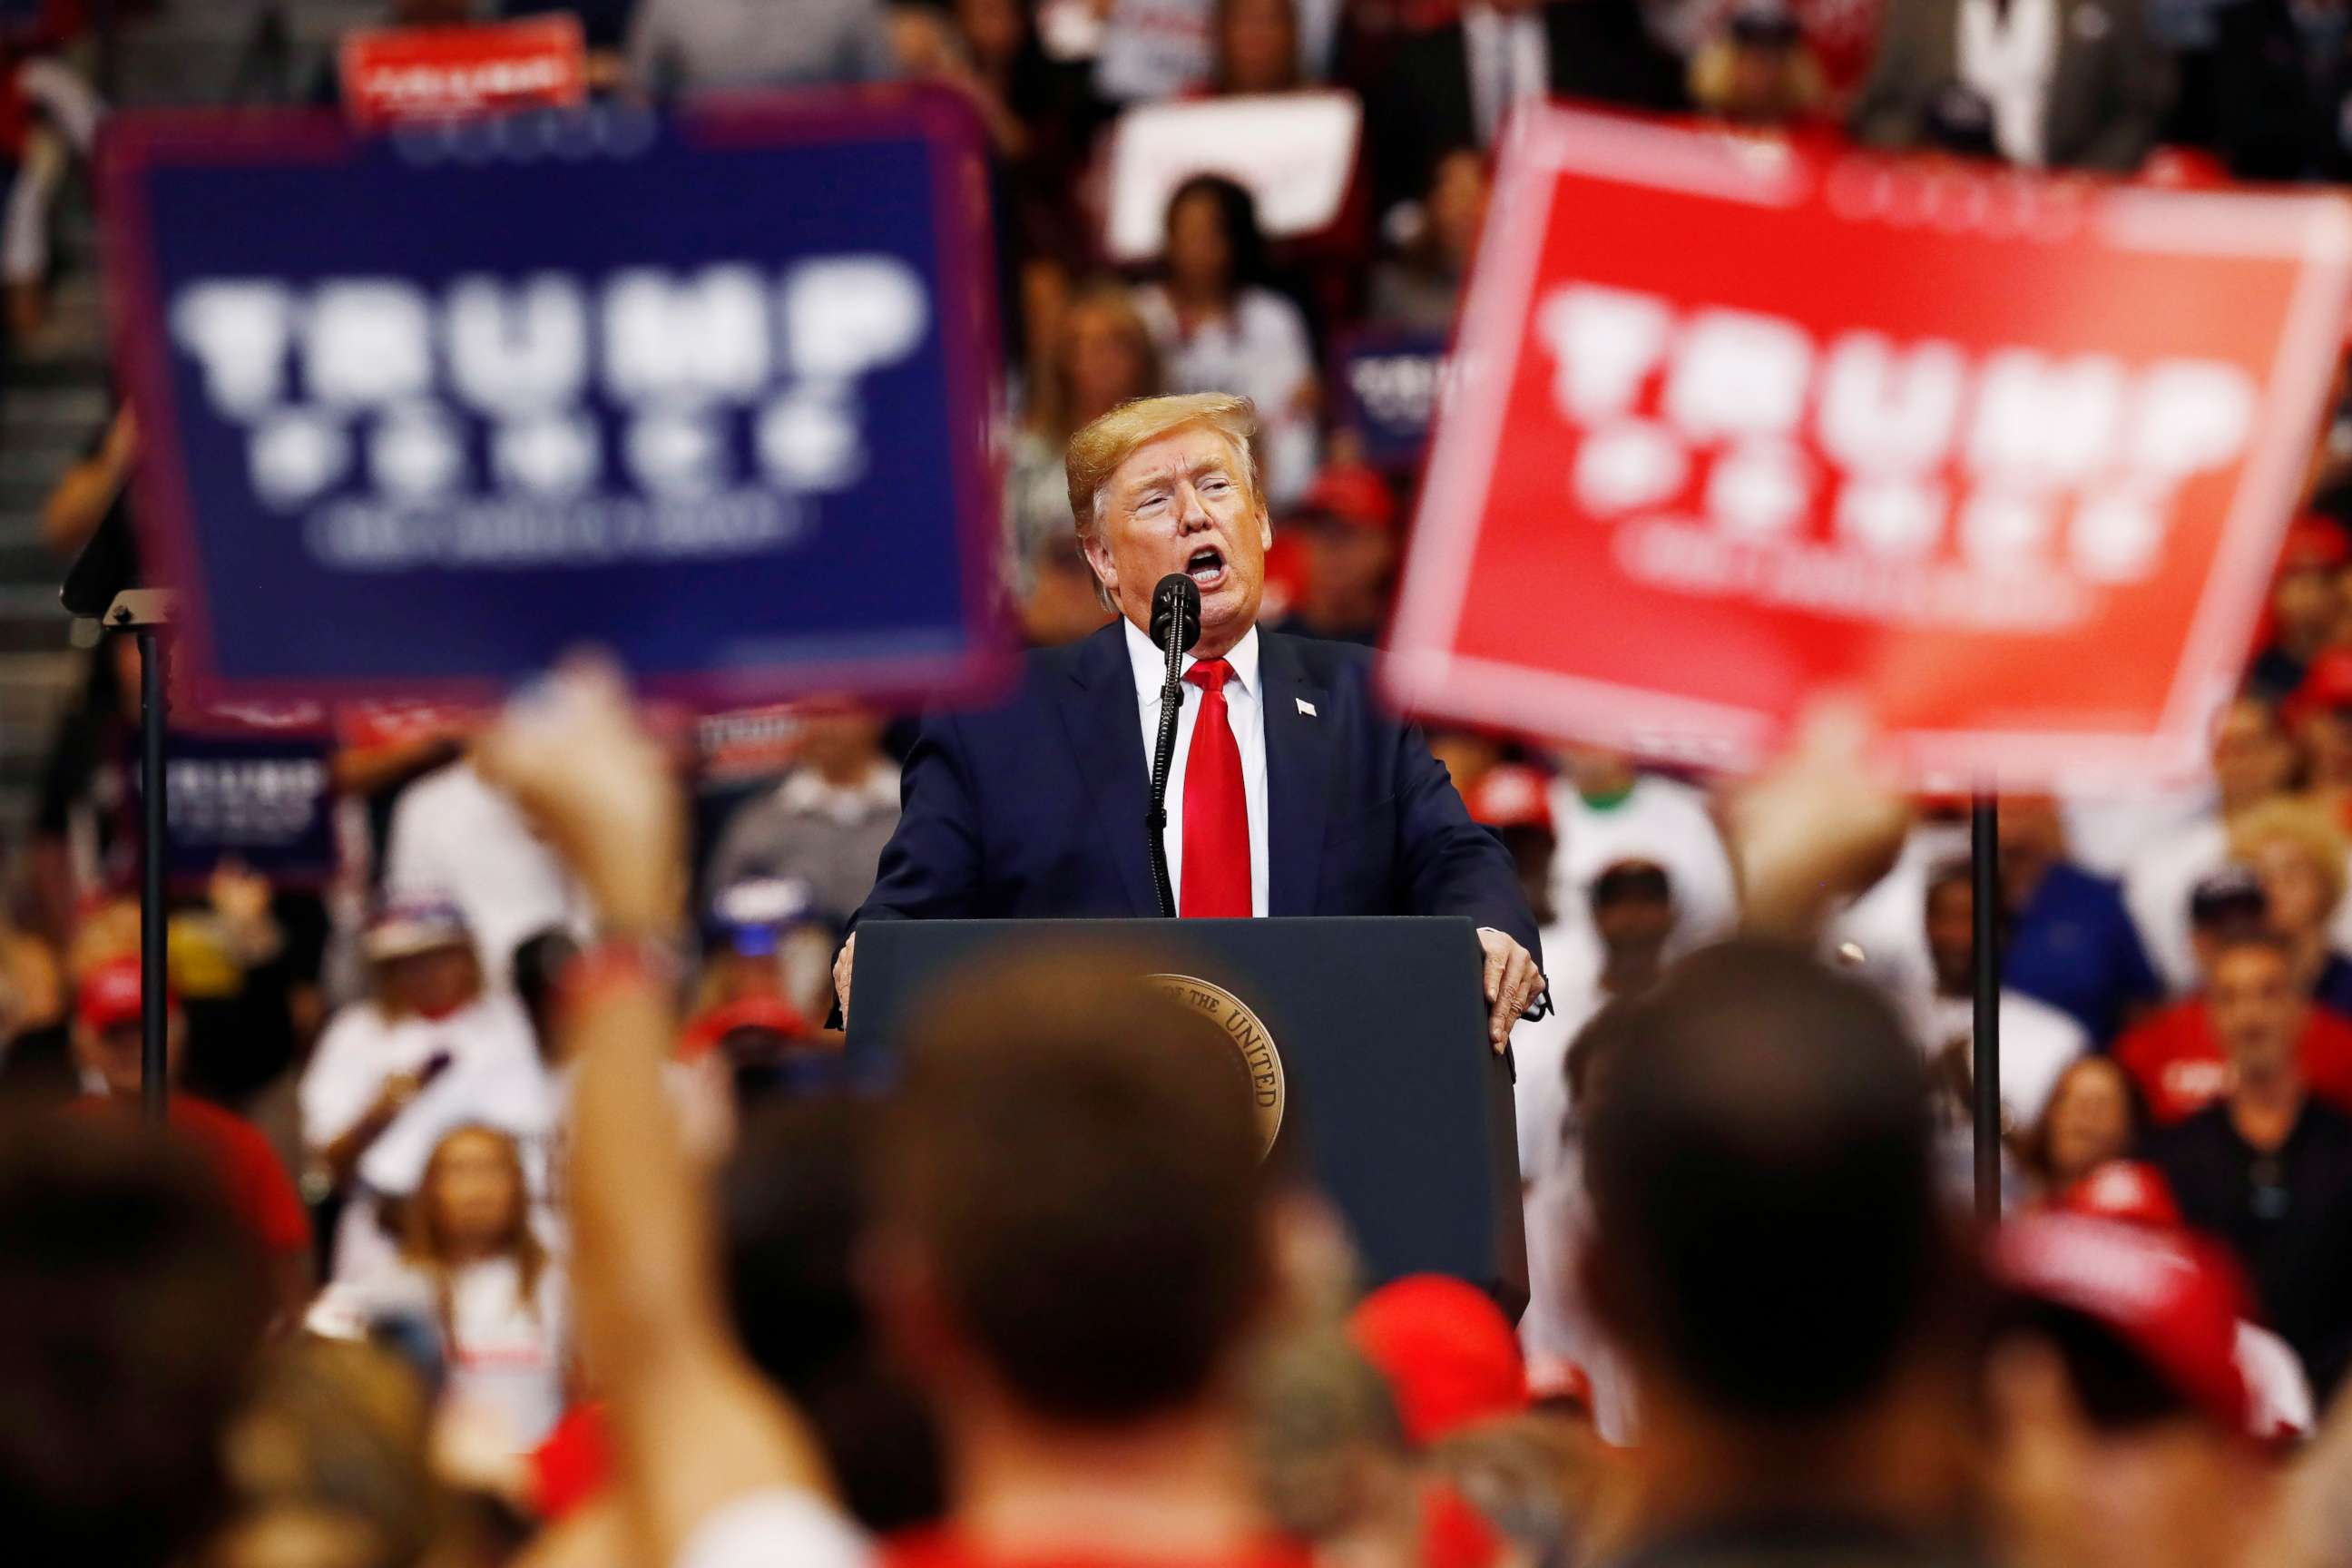 PHOTO: President Donald Trump speaks during a rally on Nov. 26, 2019, in Sunrise, Fla.